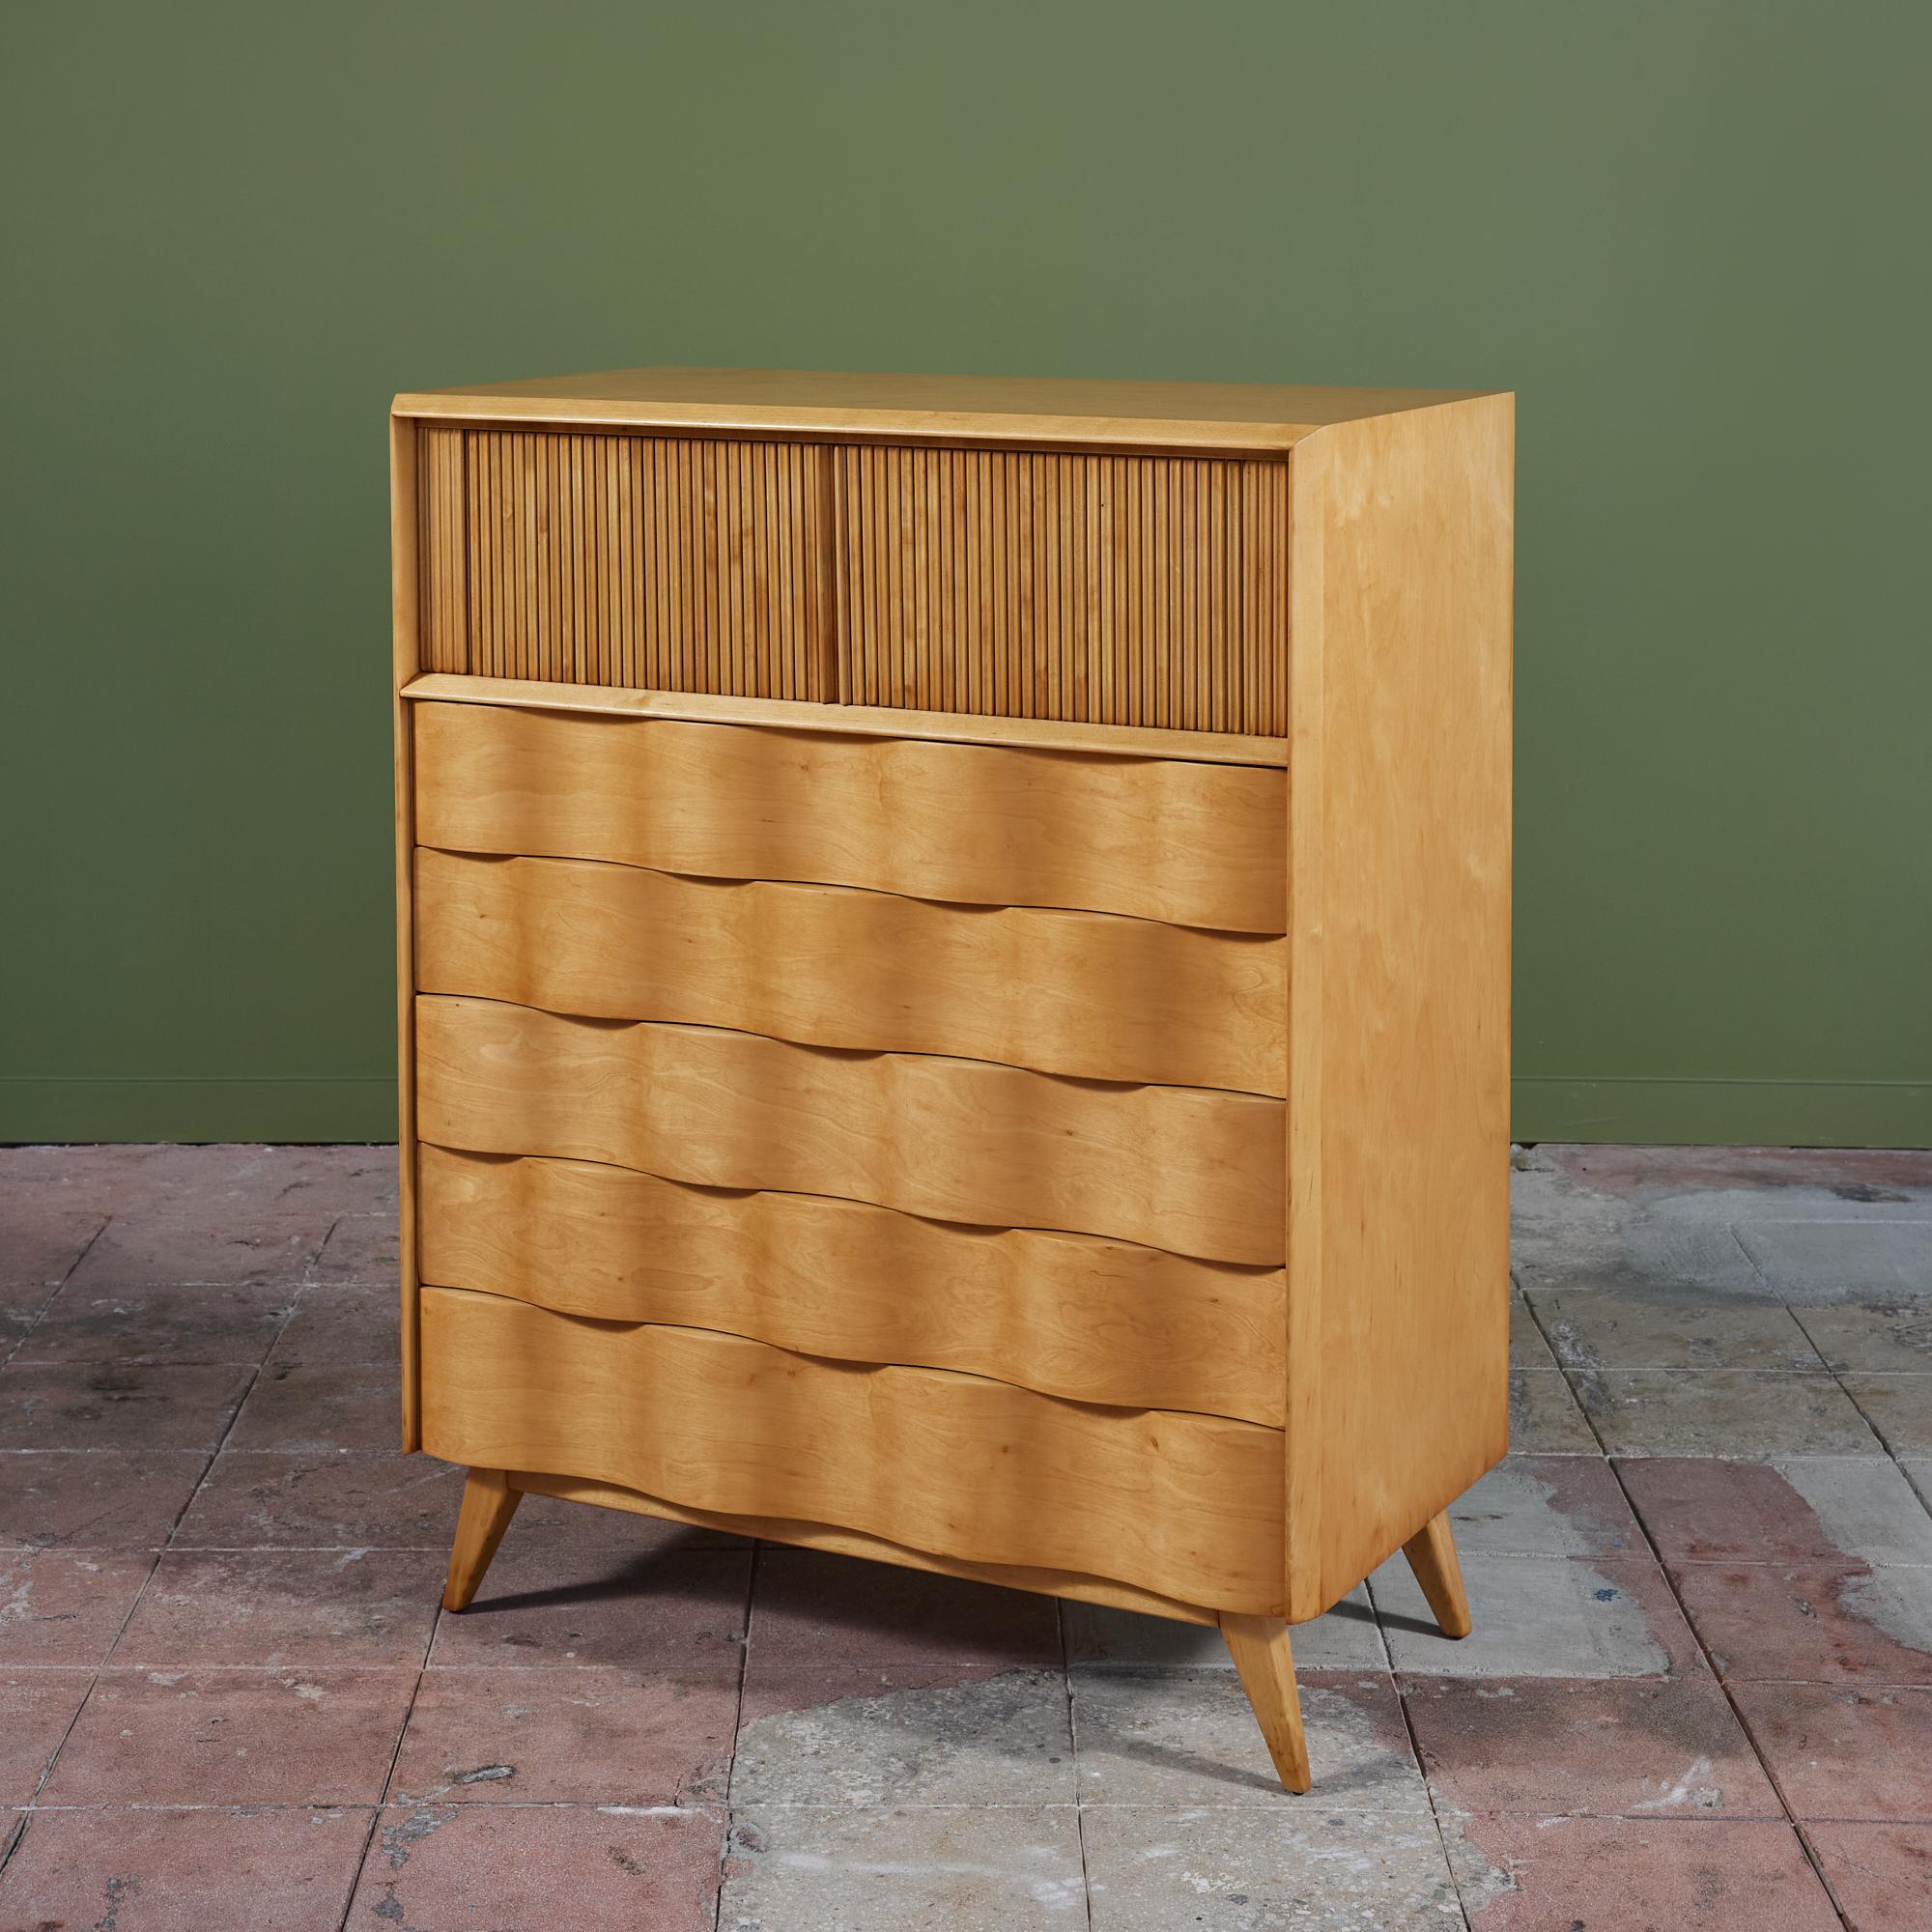 Tall dresser by Edmond Spence, c.1950s, Sweden. The maple dresser features five drawers with a unique sculpted wave front design. The top of the dresser has two tambour doors that open to reveal a divided shelf. The dresser rests on 4 splayed